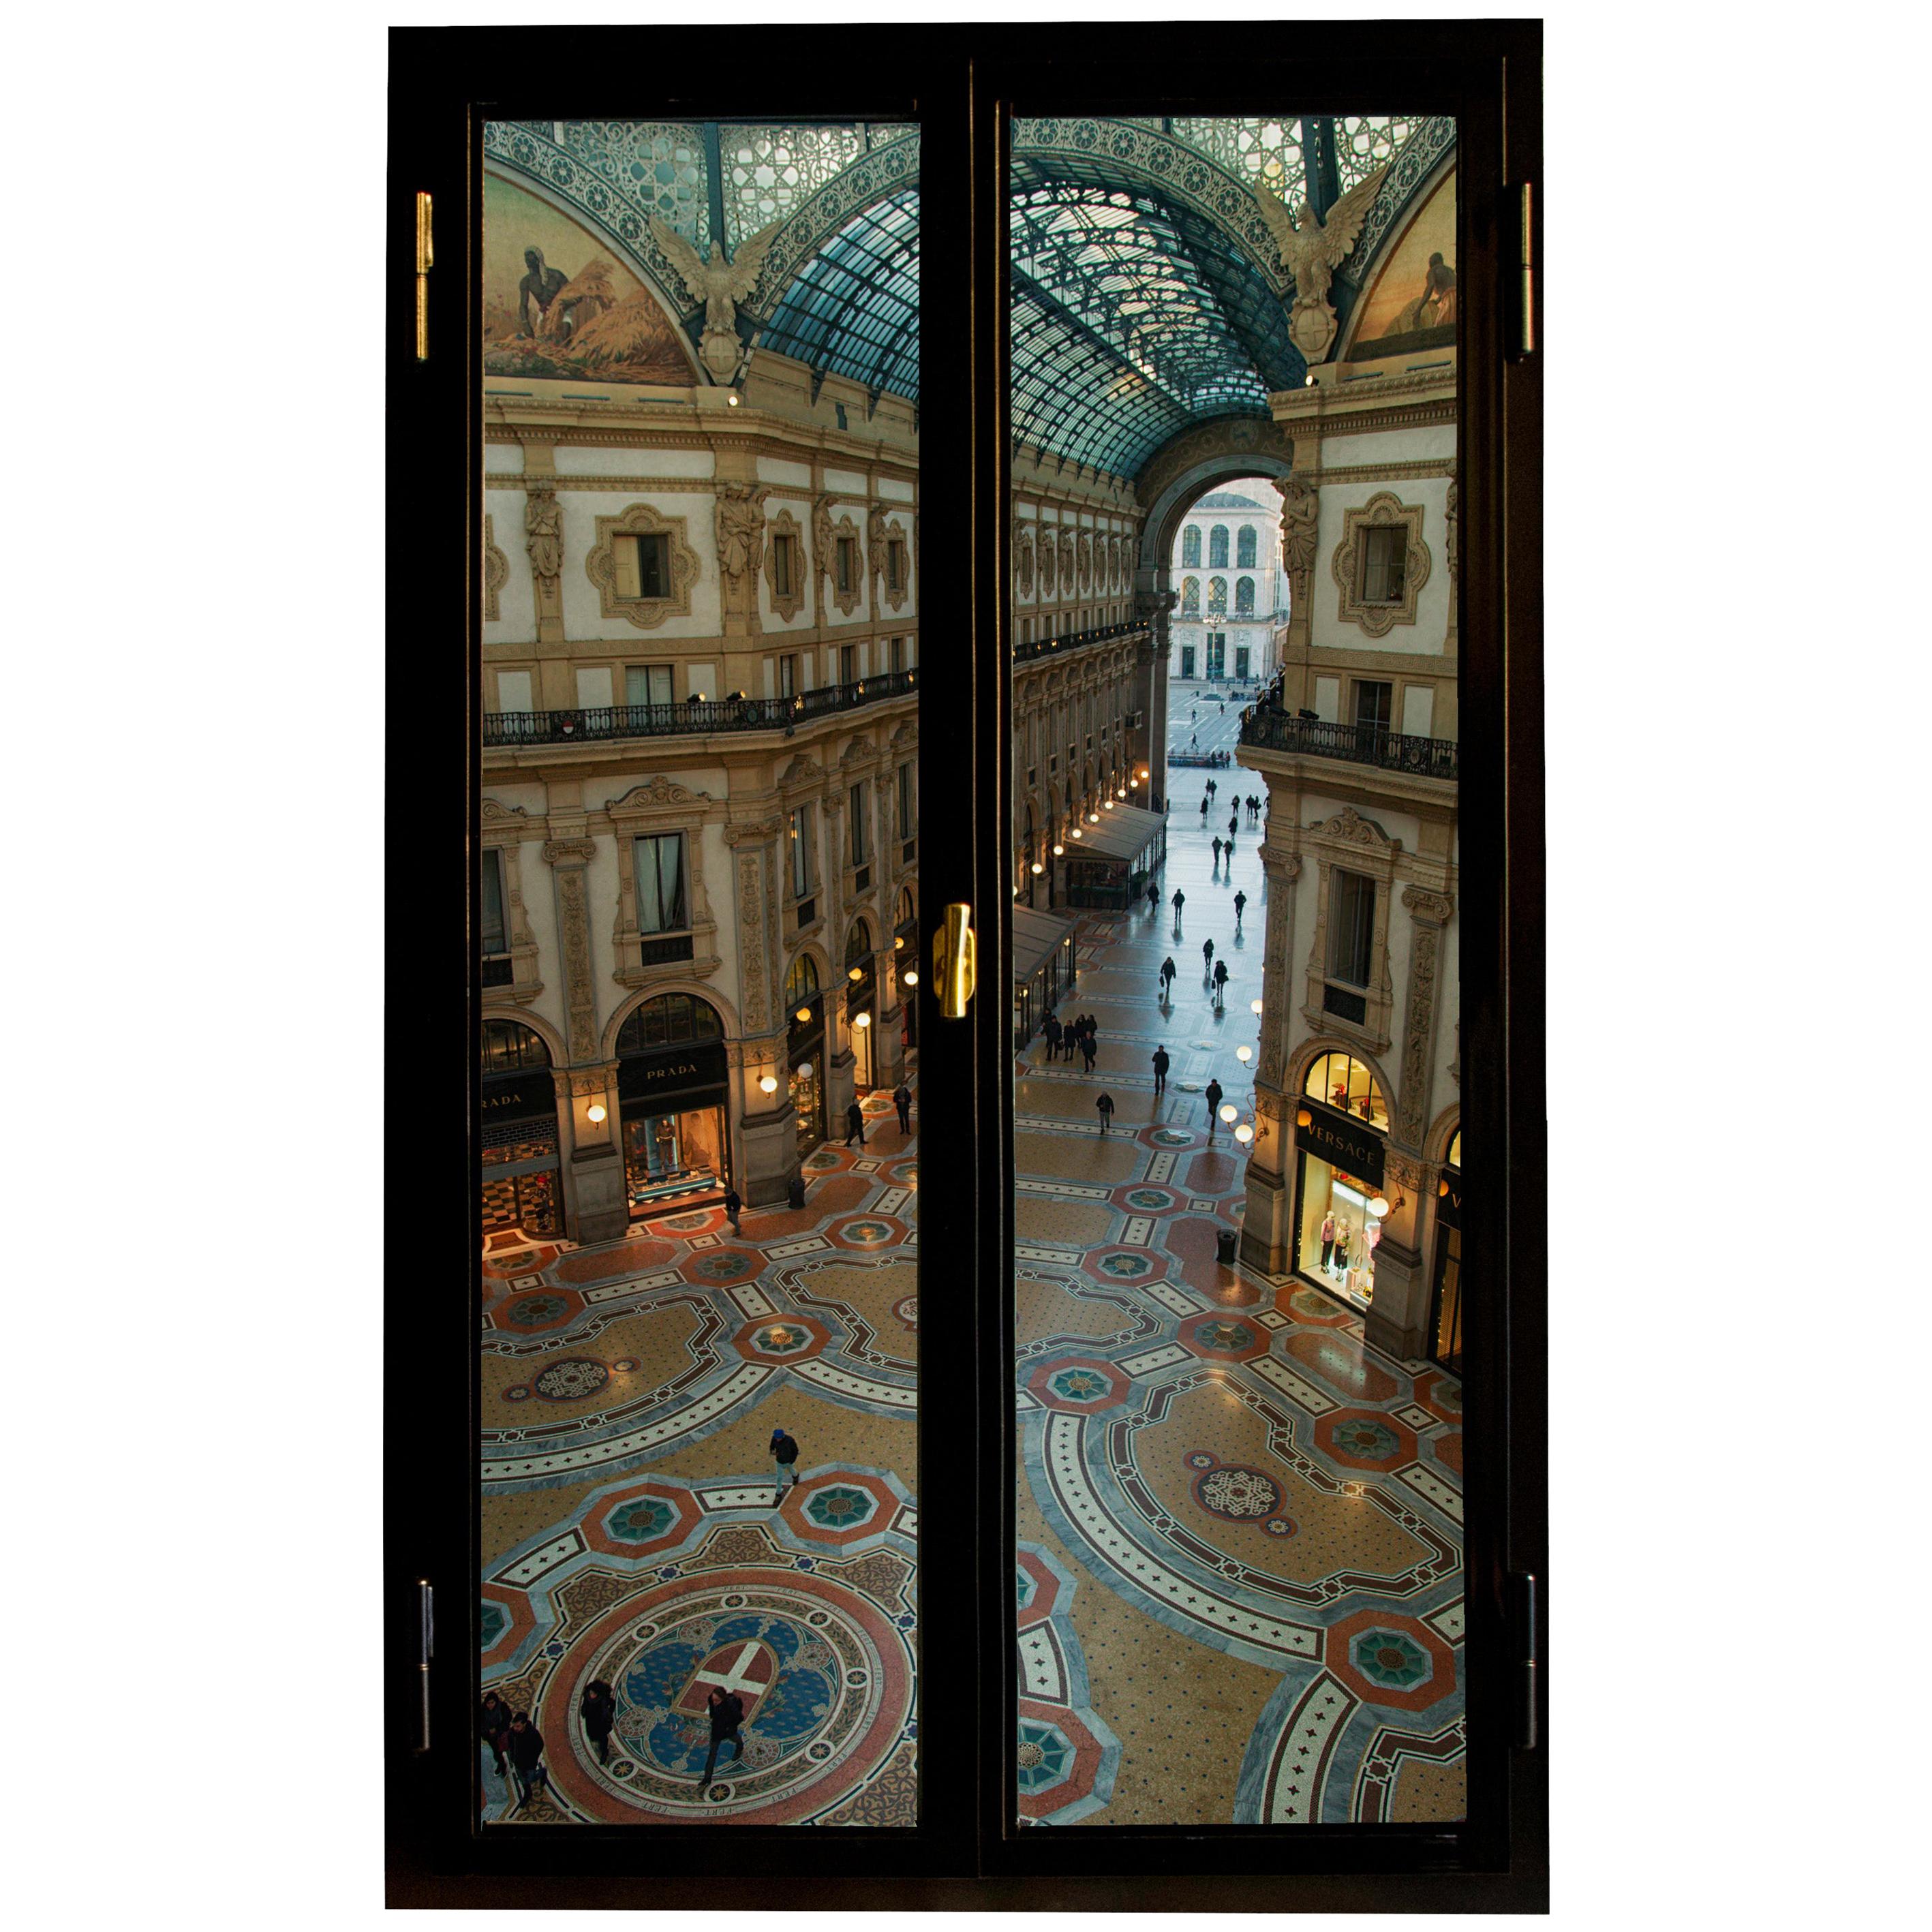 Anotherview N.10 A Day in the Life of Galleria Vittorio Emanuele by Anotherview For Sale